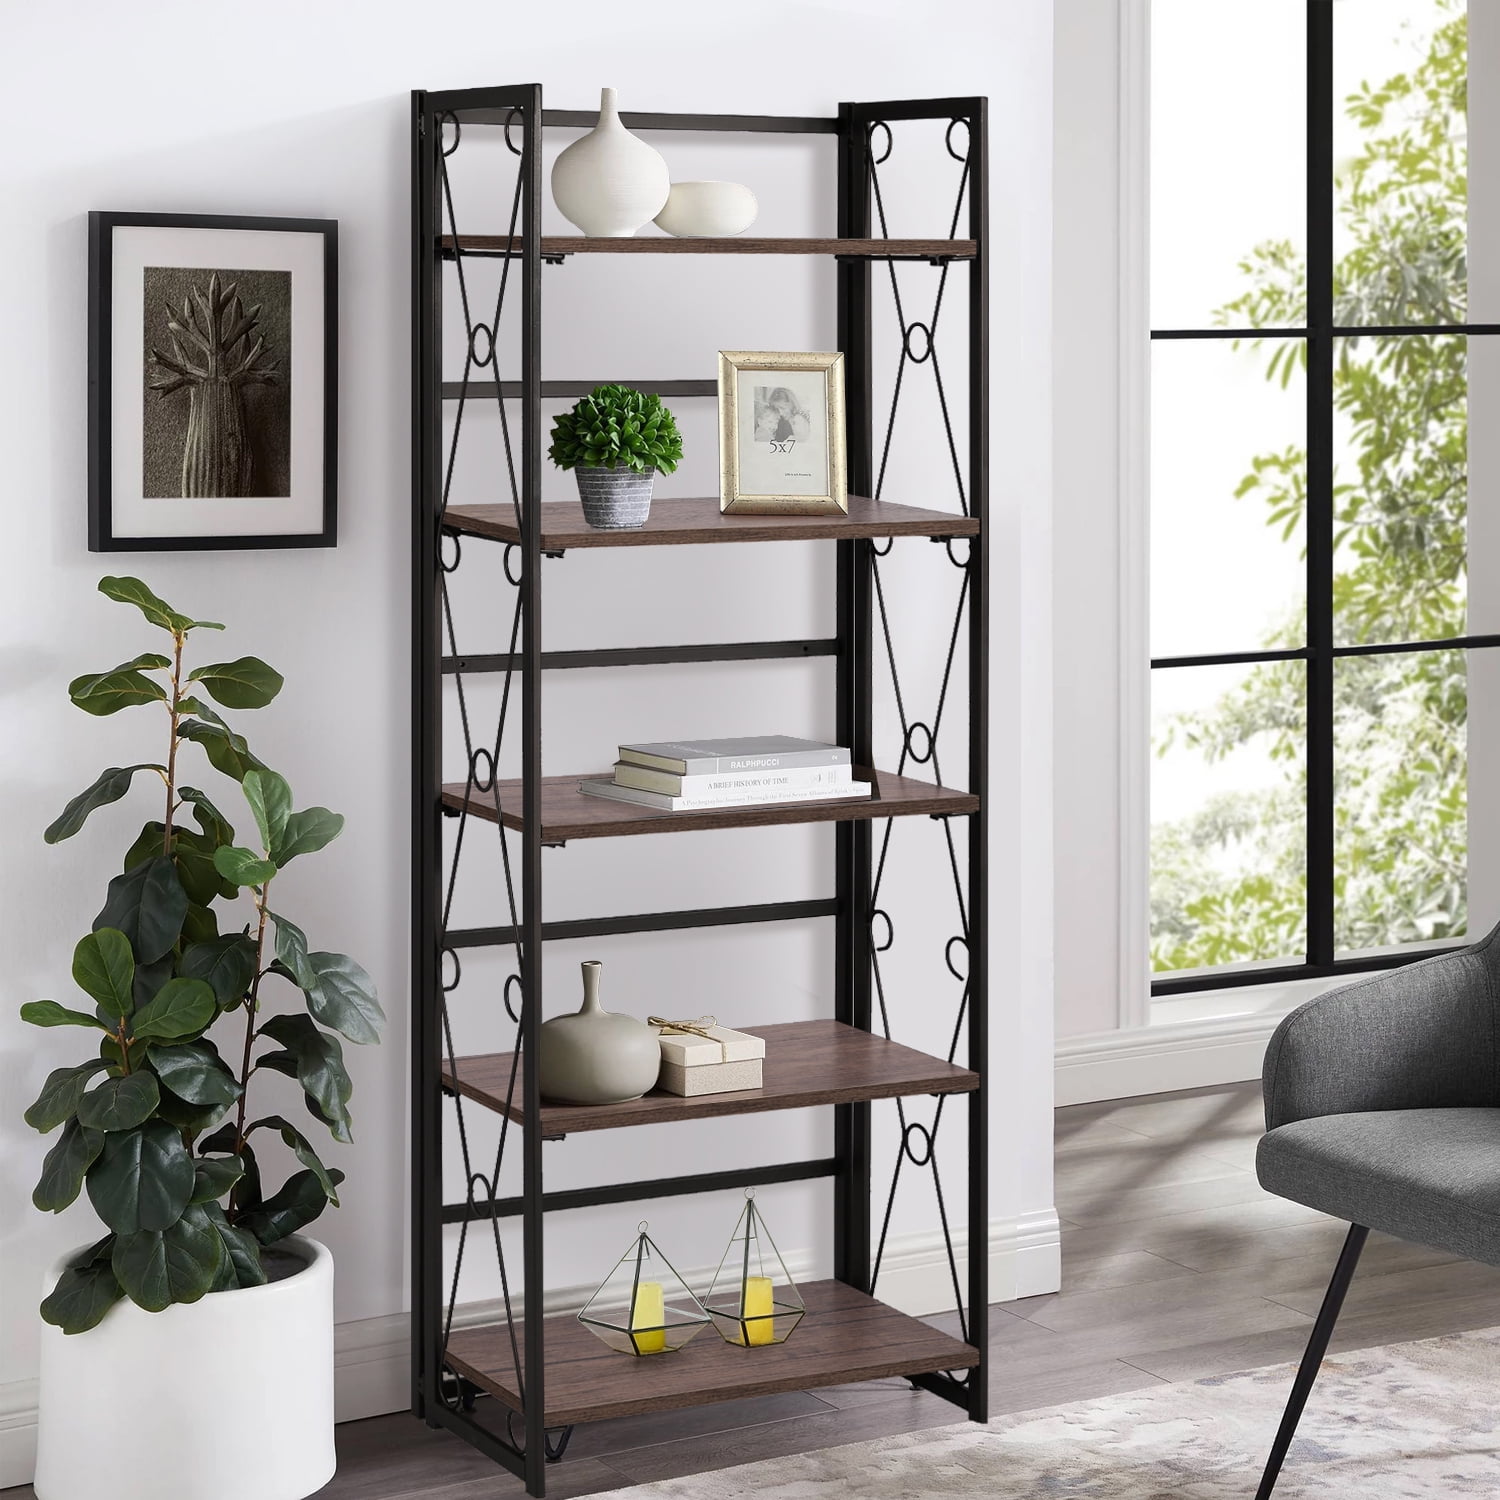 Industrial Folding Book Shelf Office Sturdy Metal and Durable MDF Wood Bookshelf 4-Tier No-Assembly Foldable Storage Shelves for Living Room Black 1-Pack Decorative Racks and Bedroom